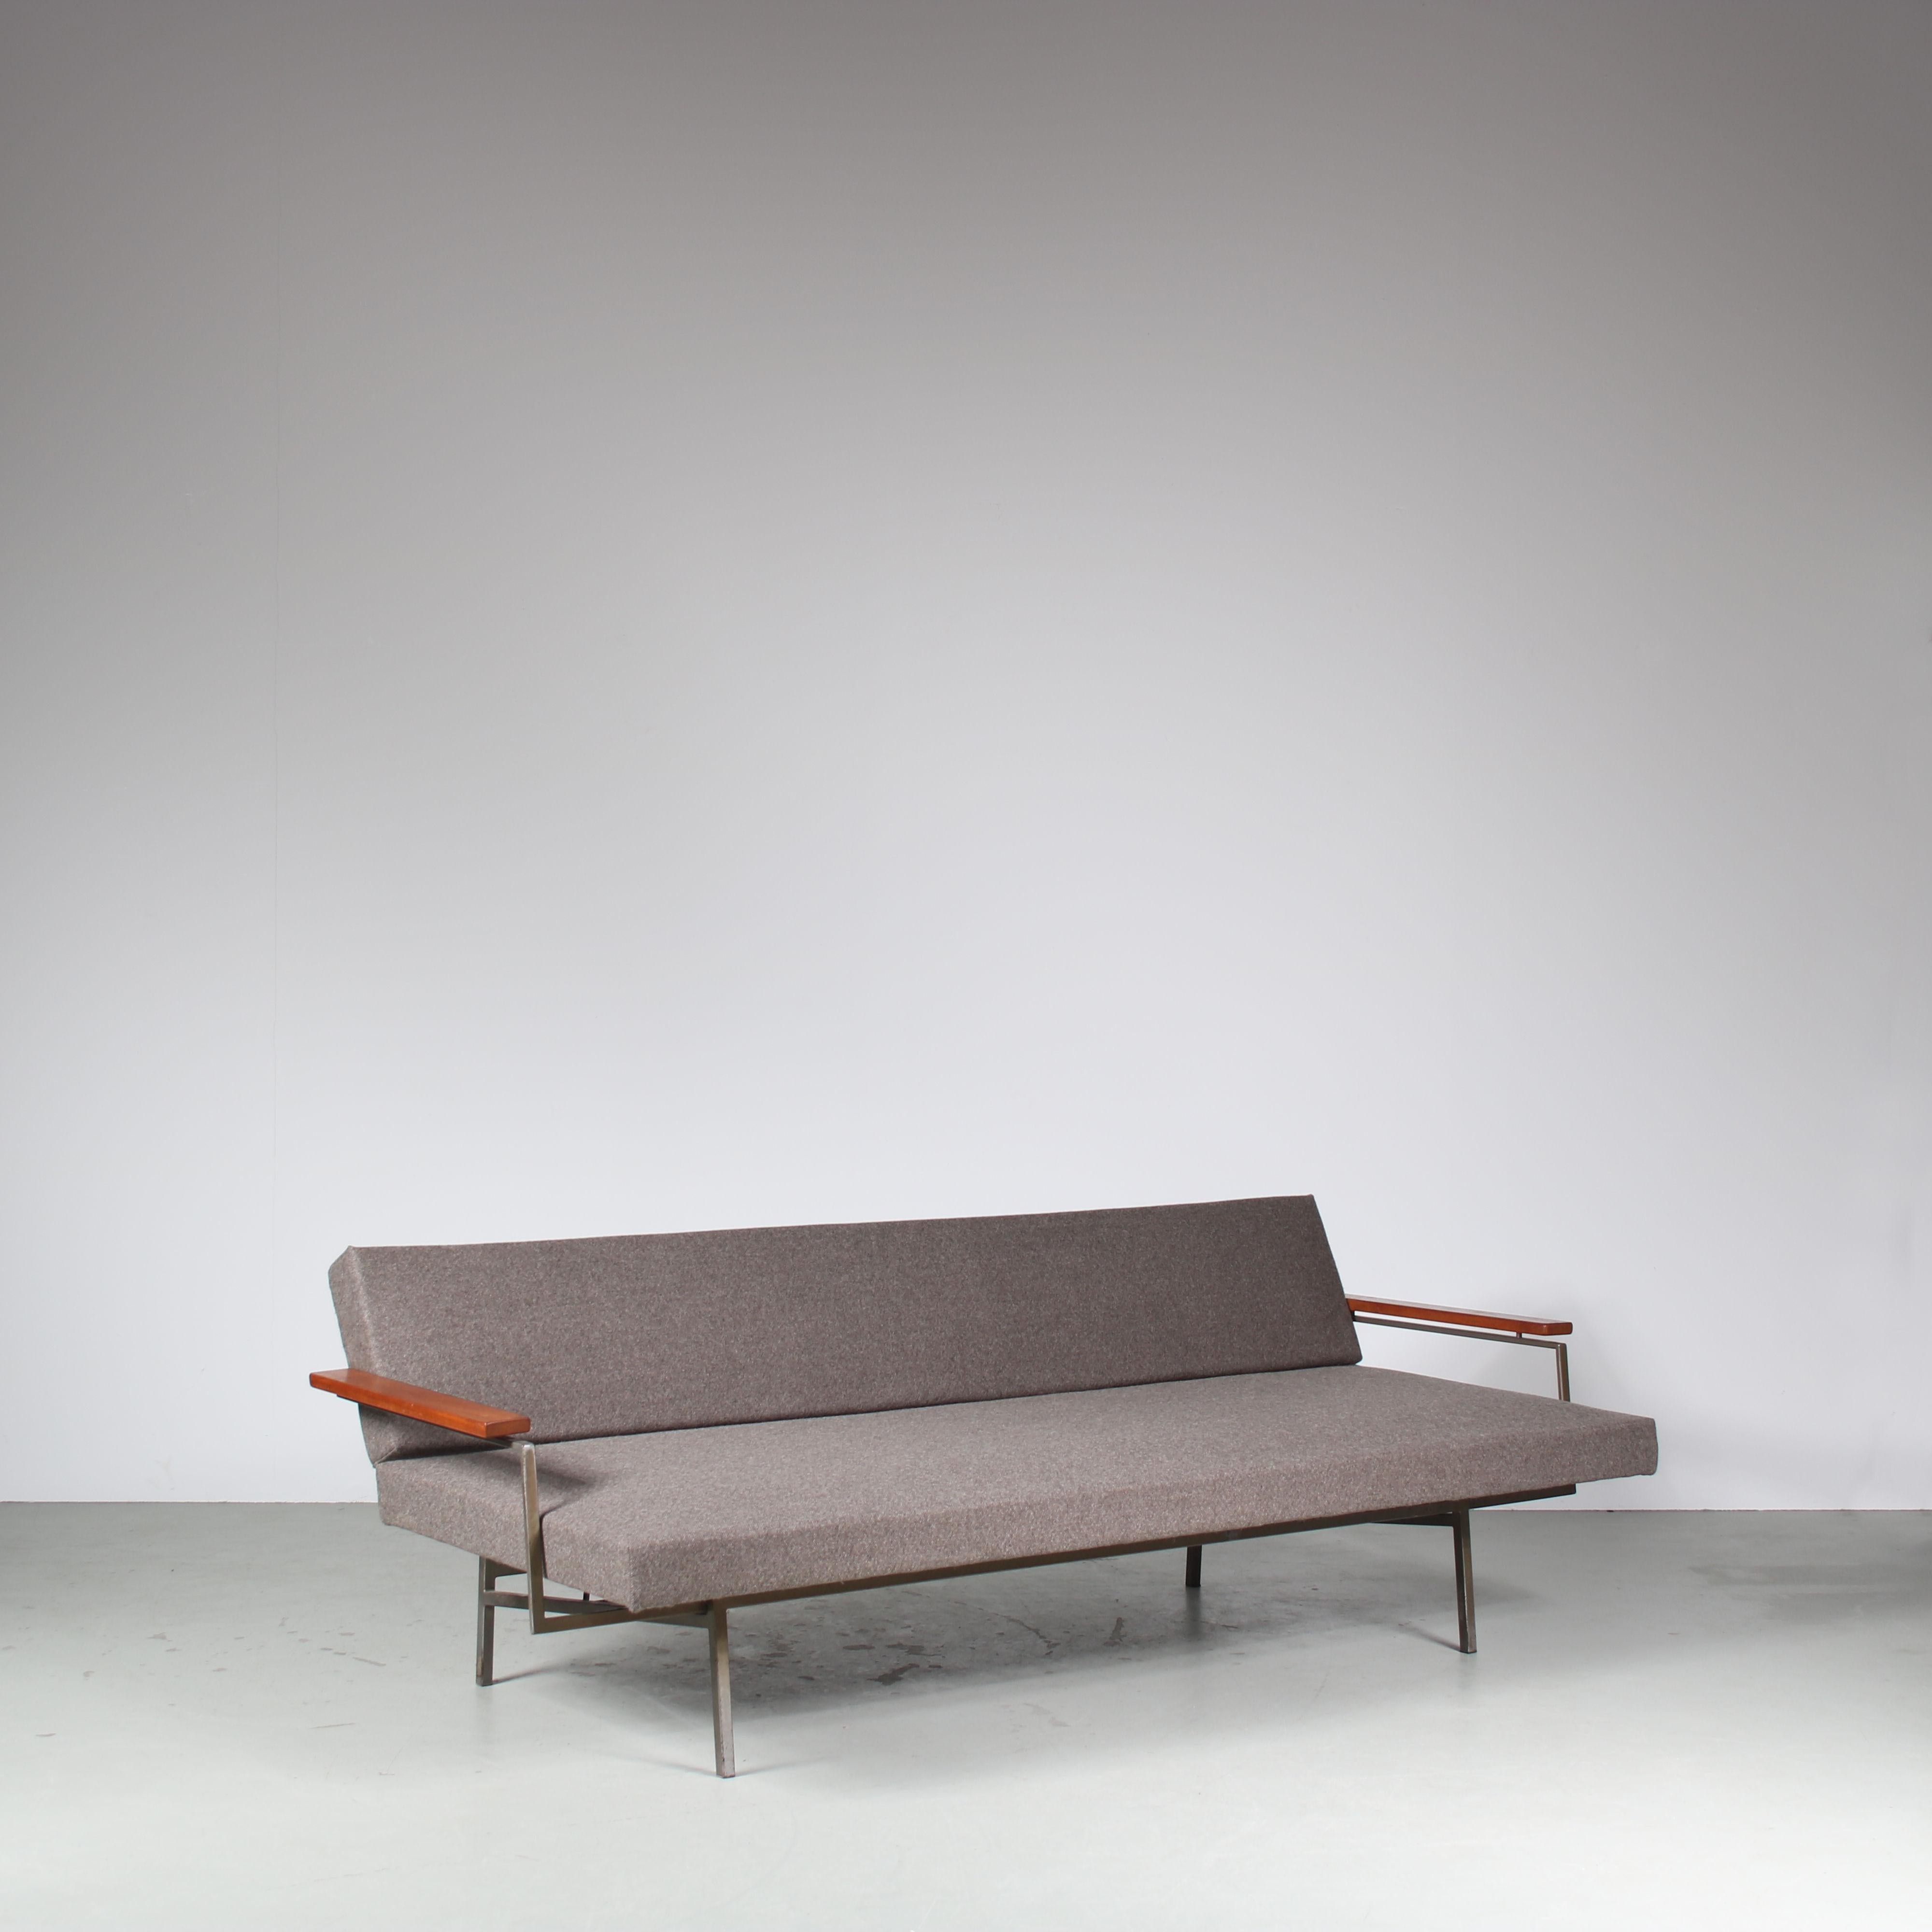 Sleeping Sofa by Rob Parry for Gelderland, Netherlands 1960 In Good Condition For Sale In Amsterdam, NL